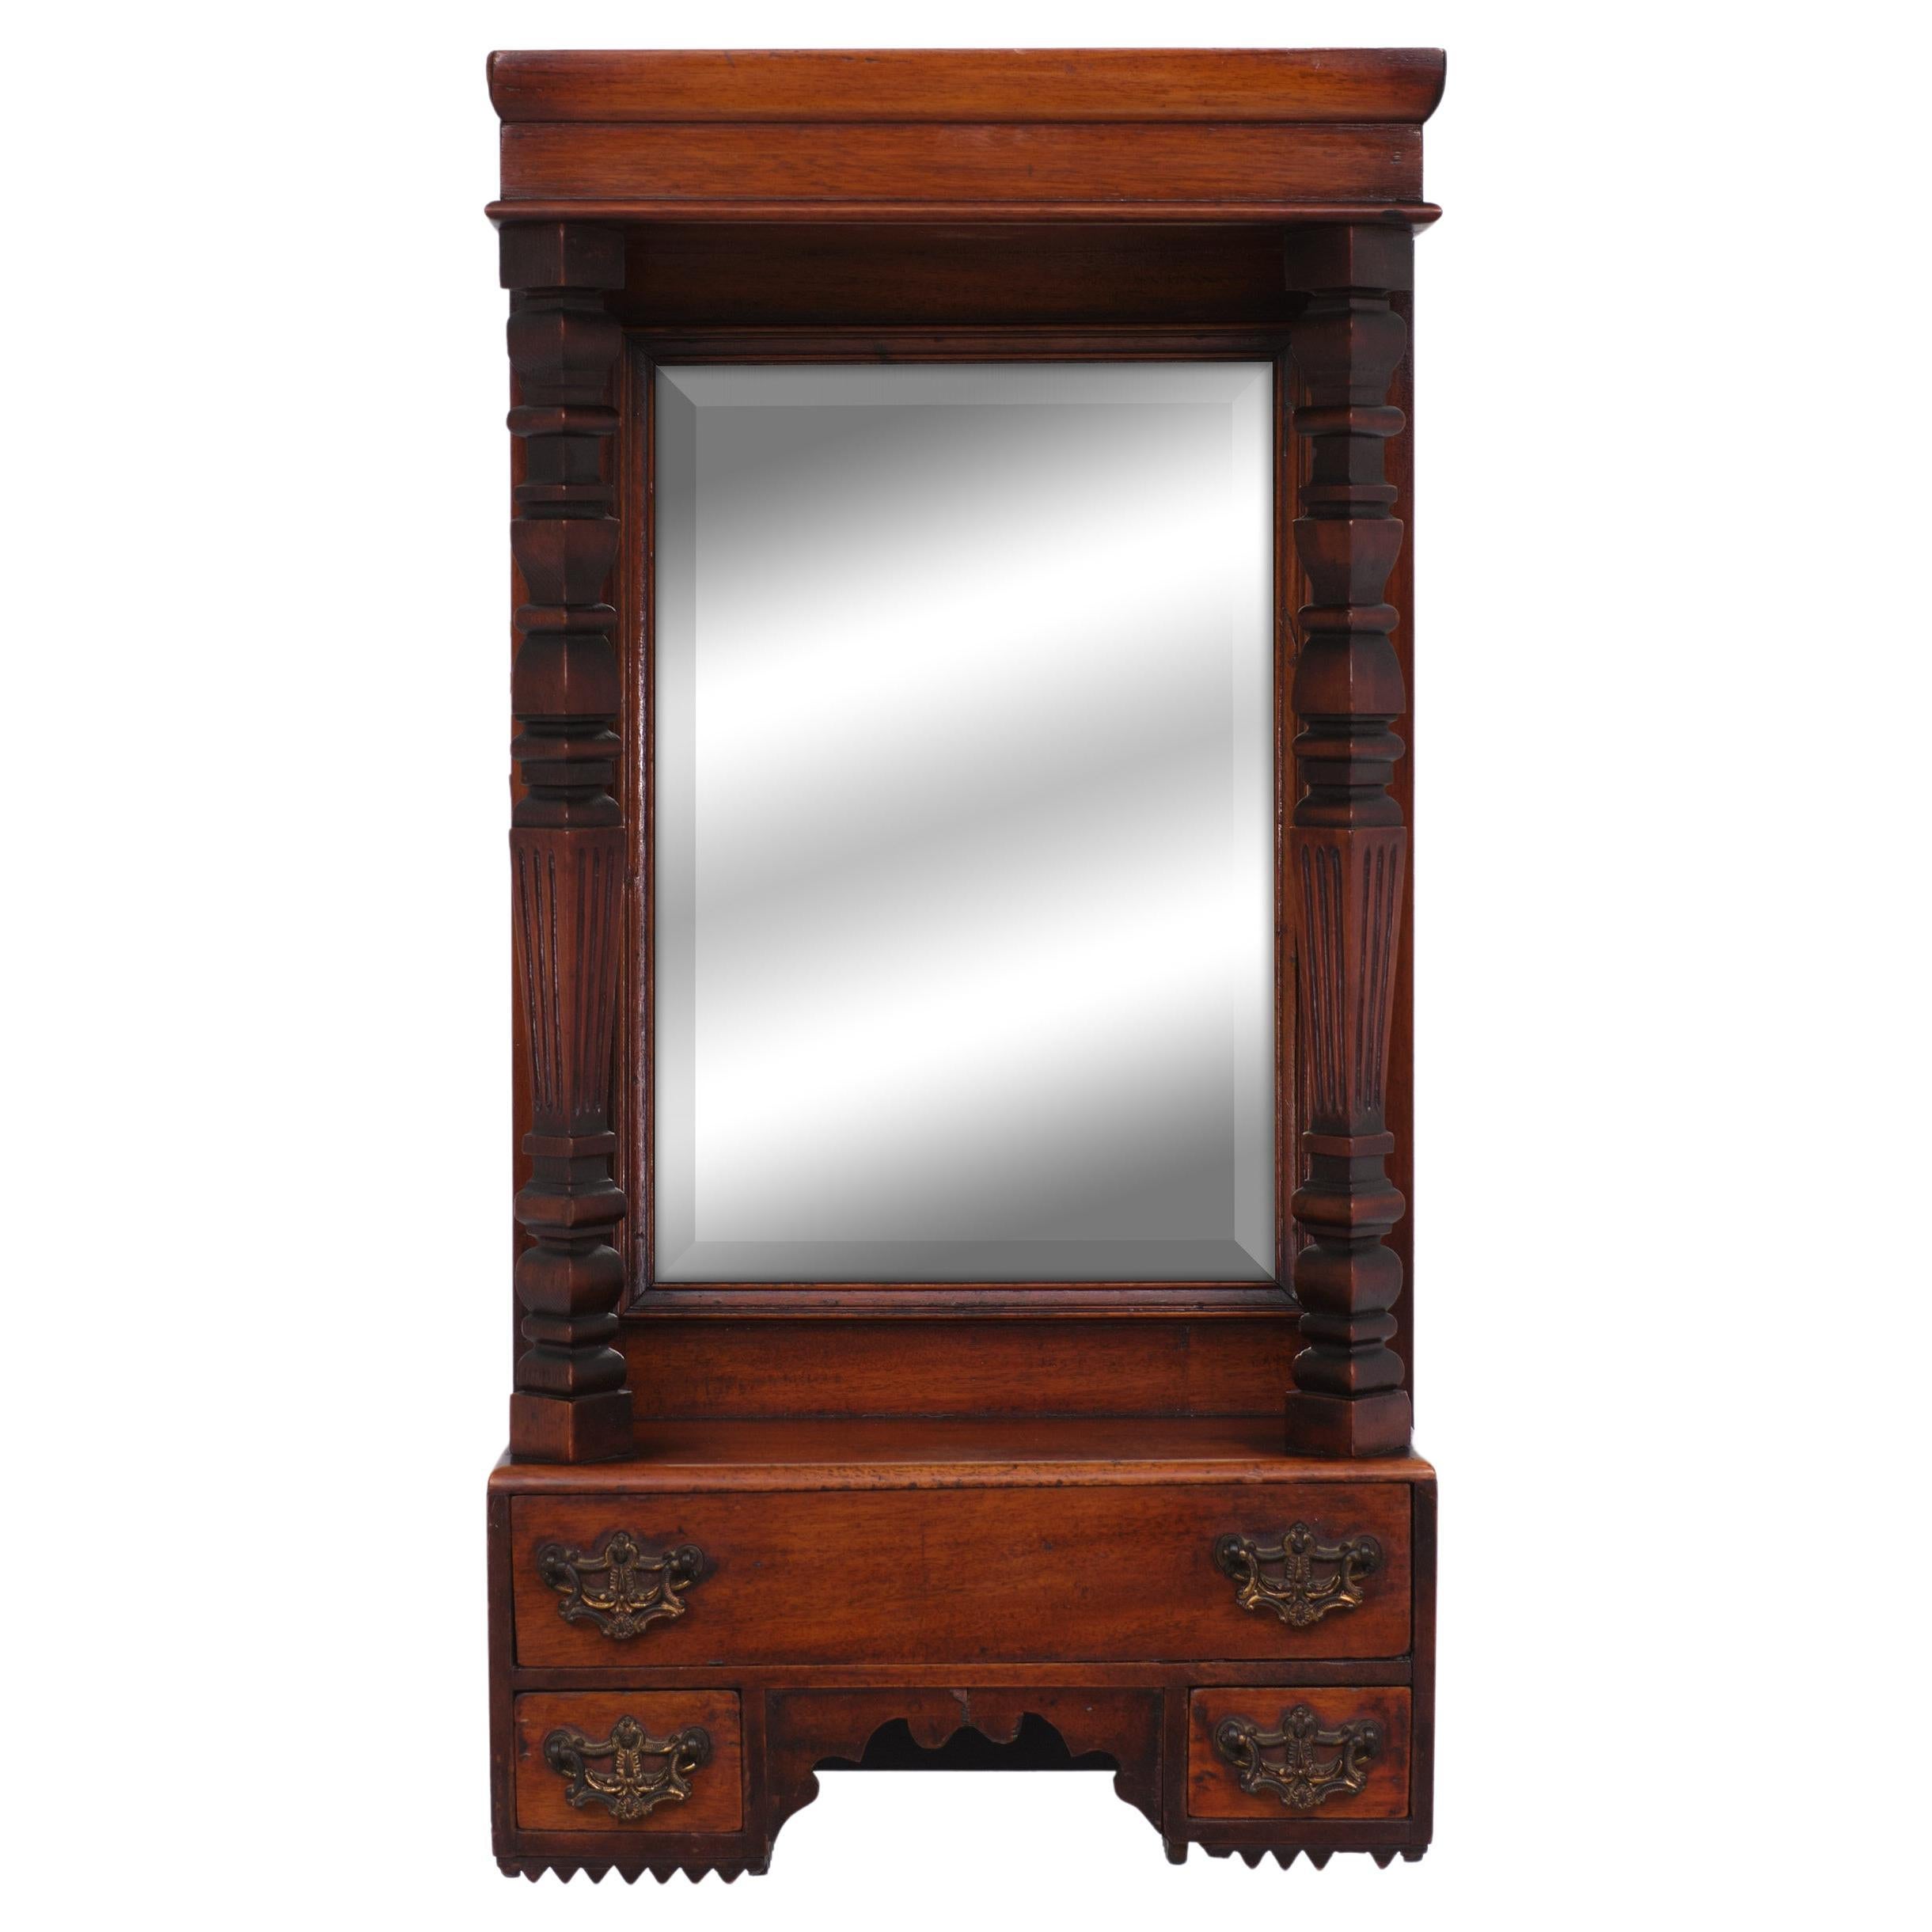 Very nice Victorian Hall Mirror. Wall Hanging. Mahogany Three drawers. Beveled mirror.
Gilded Bronze handles. Beathiful patine. Superb color.